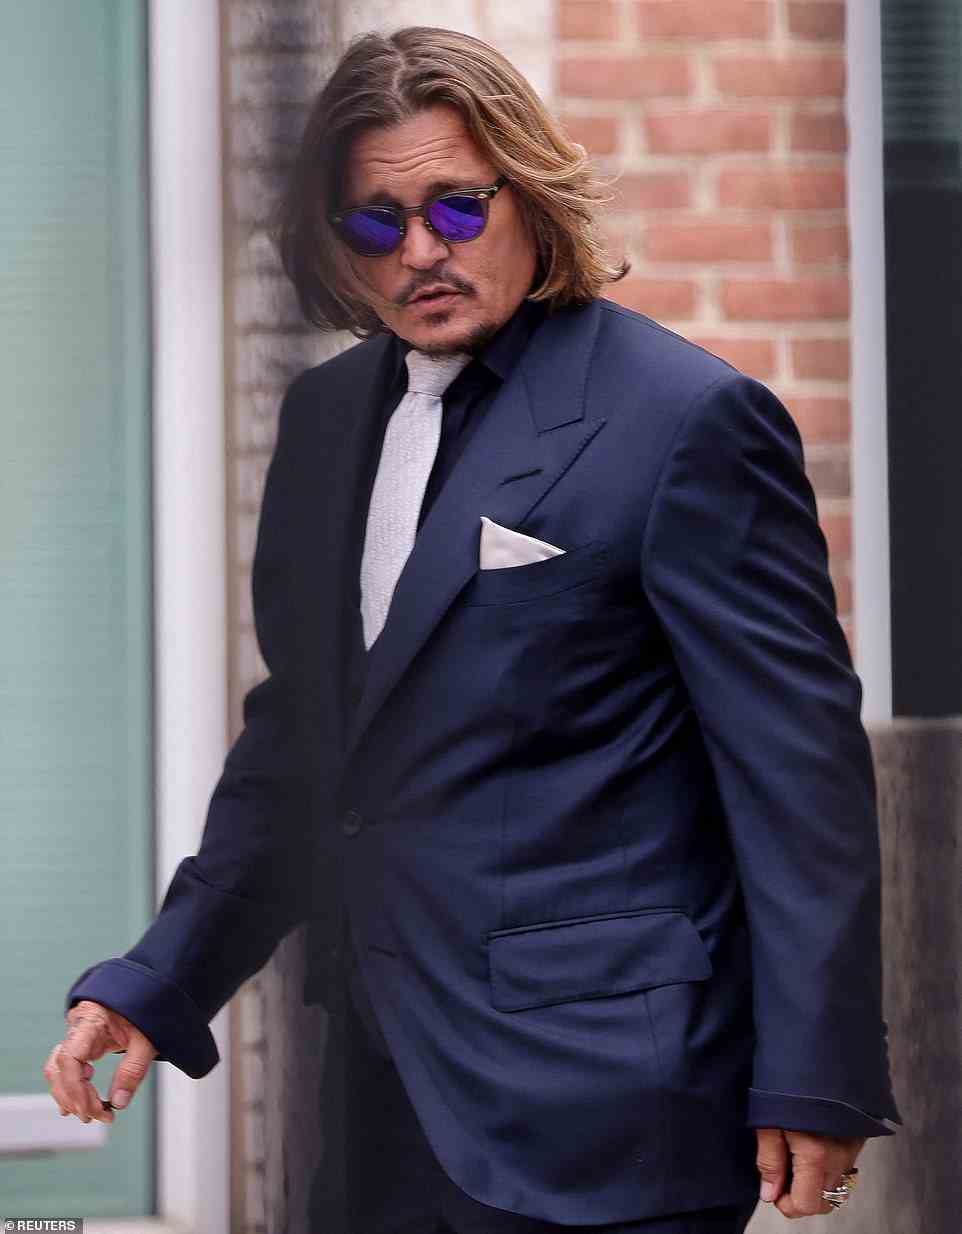 Exes Depp (pictured on April 12), 58, and Heard, 35 - who were married from 2015 to 2016 - have been battling it out in court in recent weeks